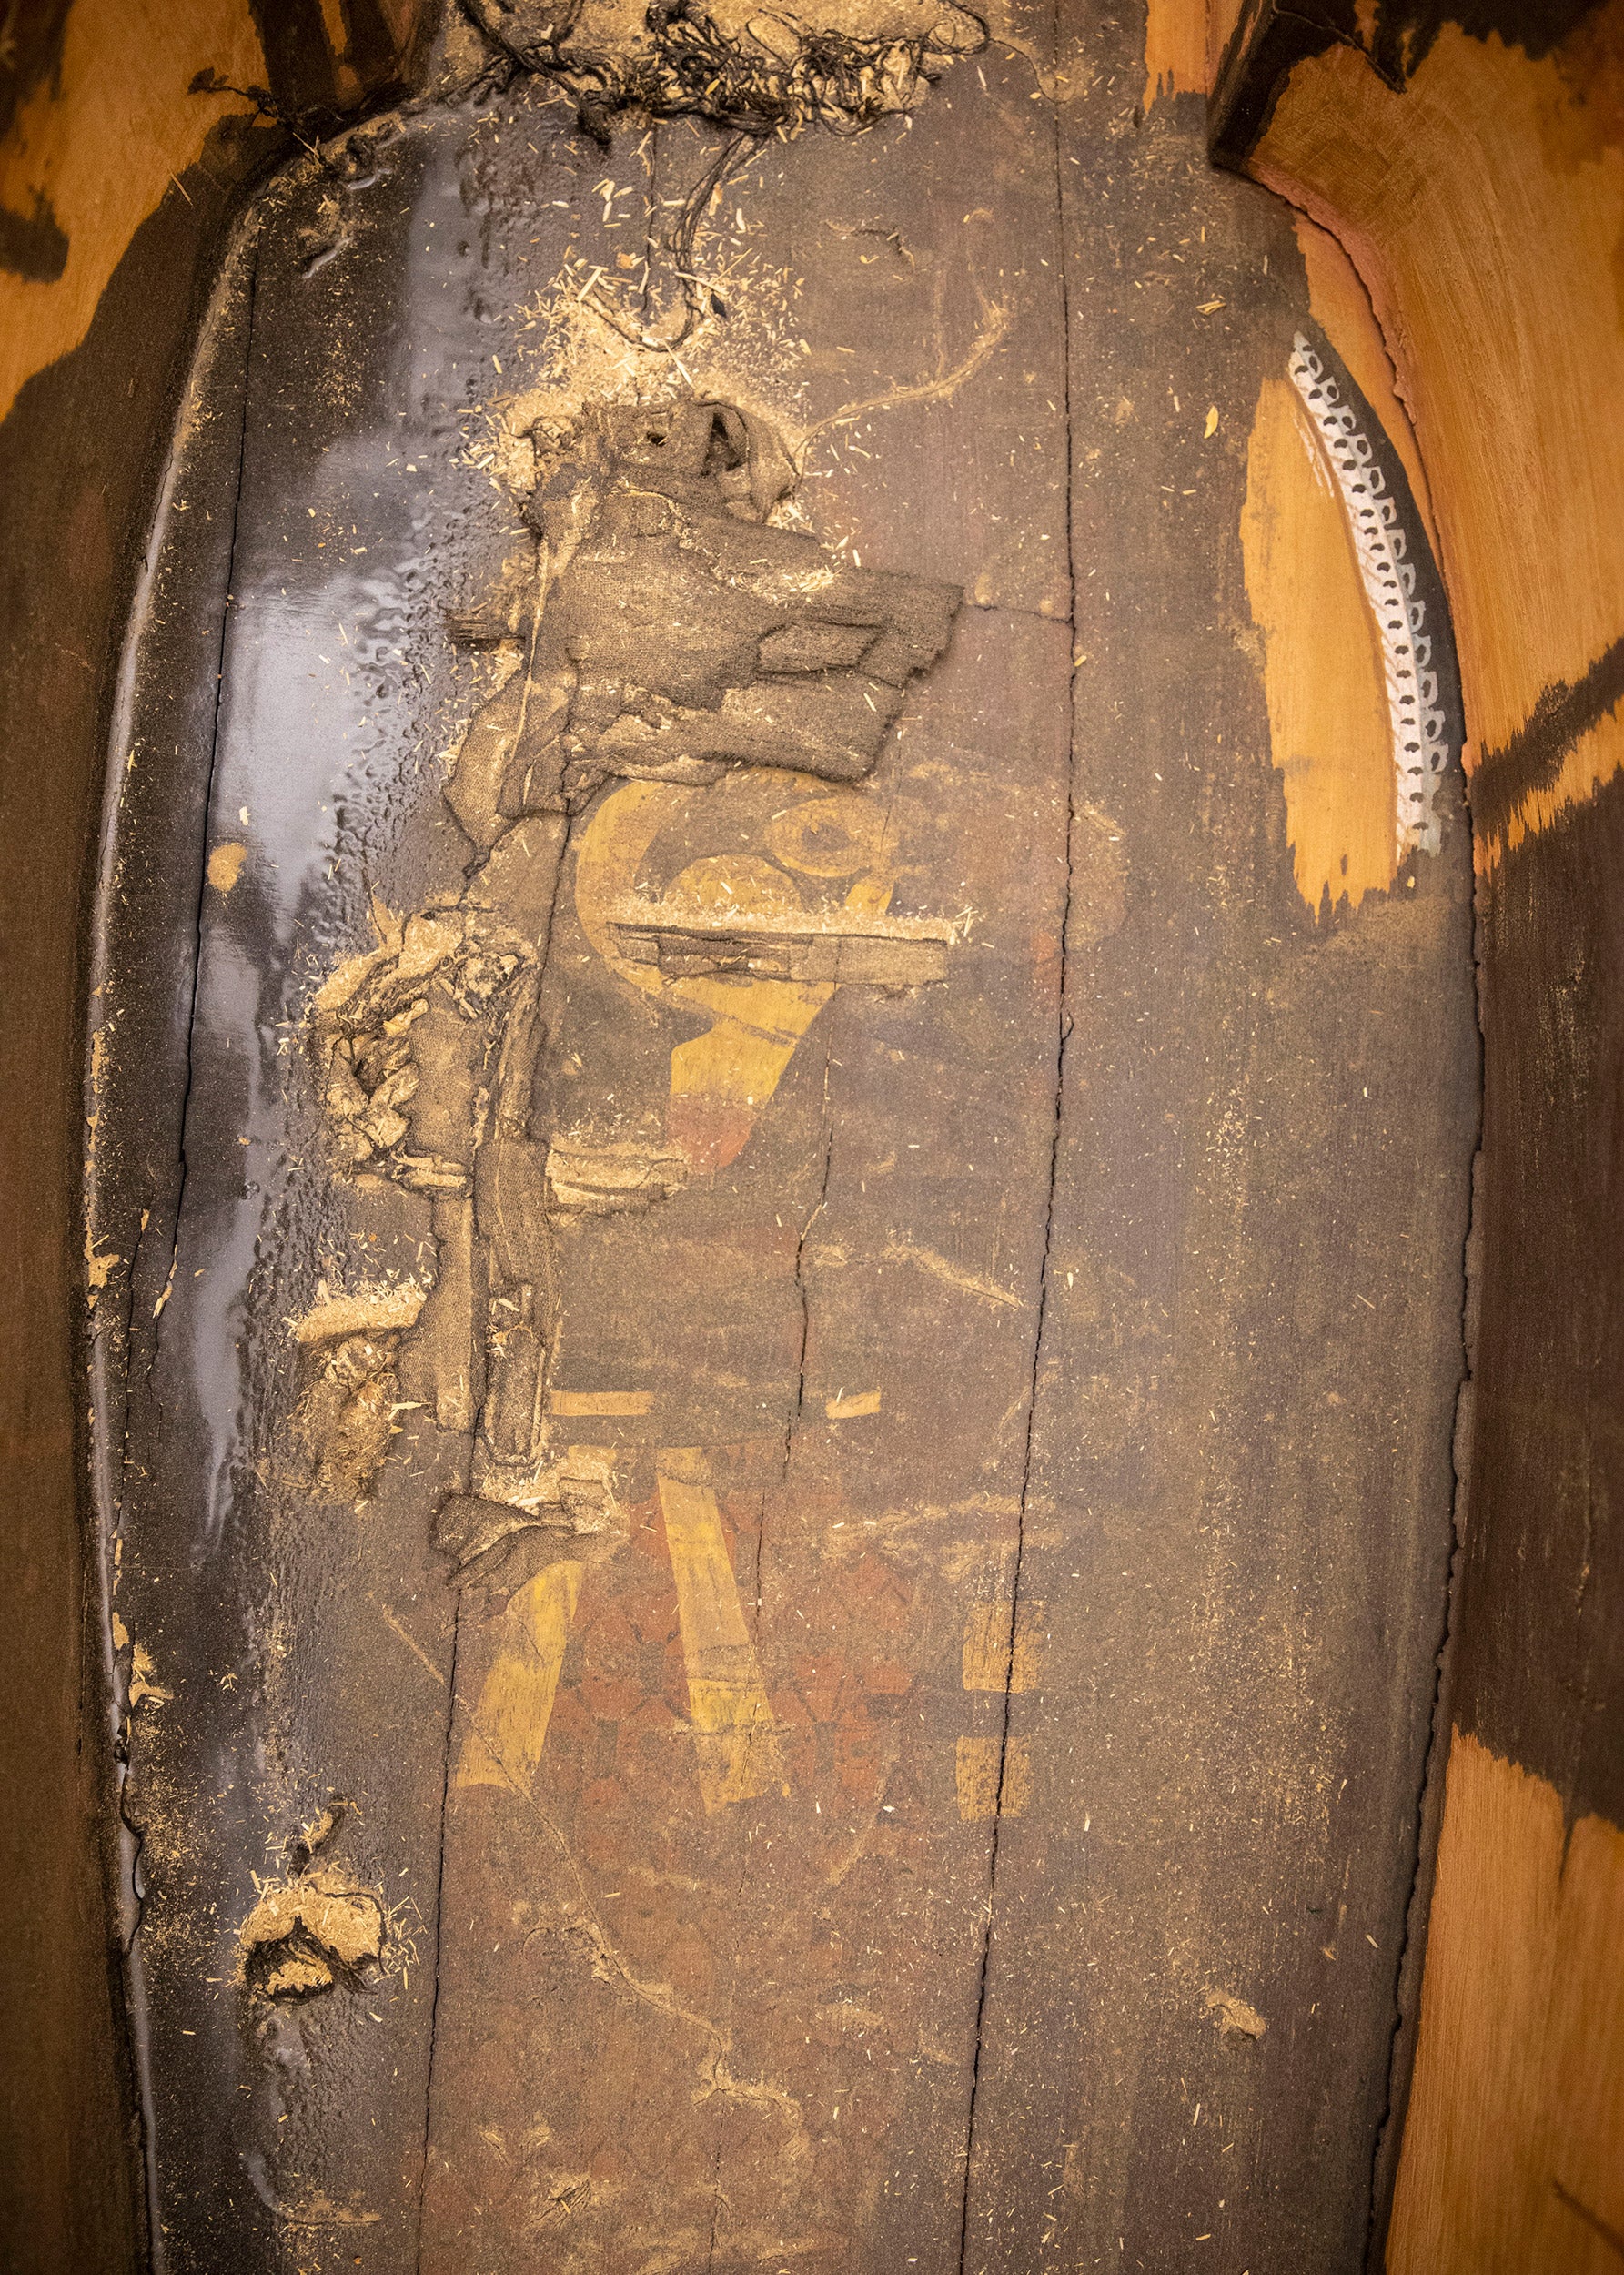 Detail of the sun god painted inside Ankh-khonsu's coffin, partially covered by a tar-like coating.